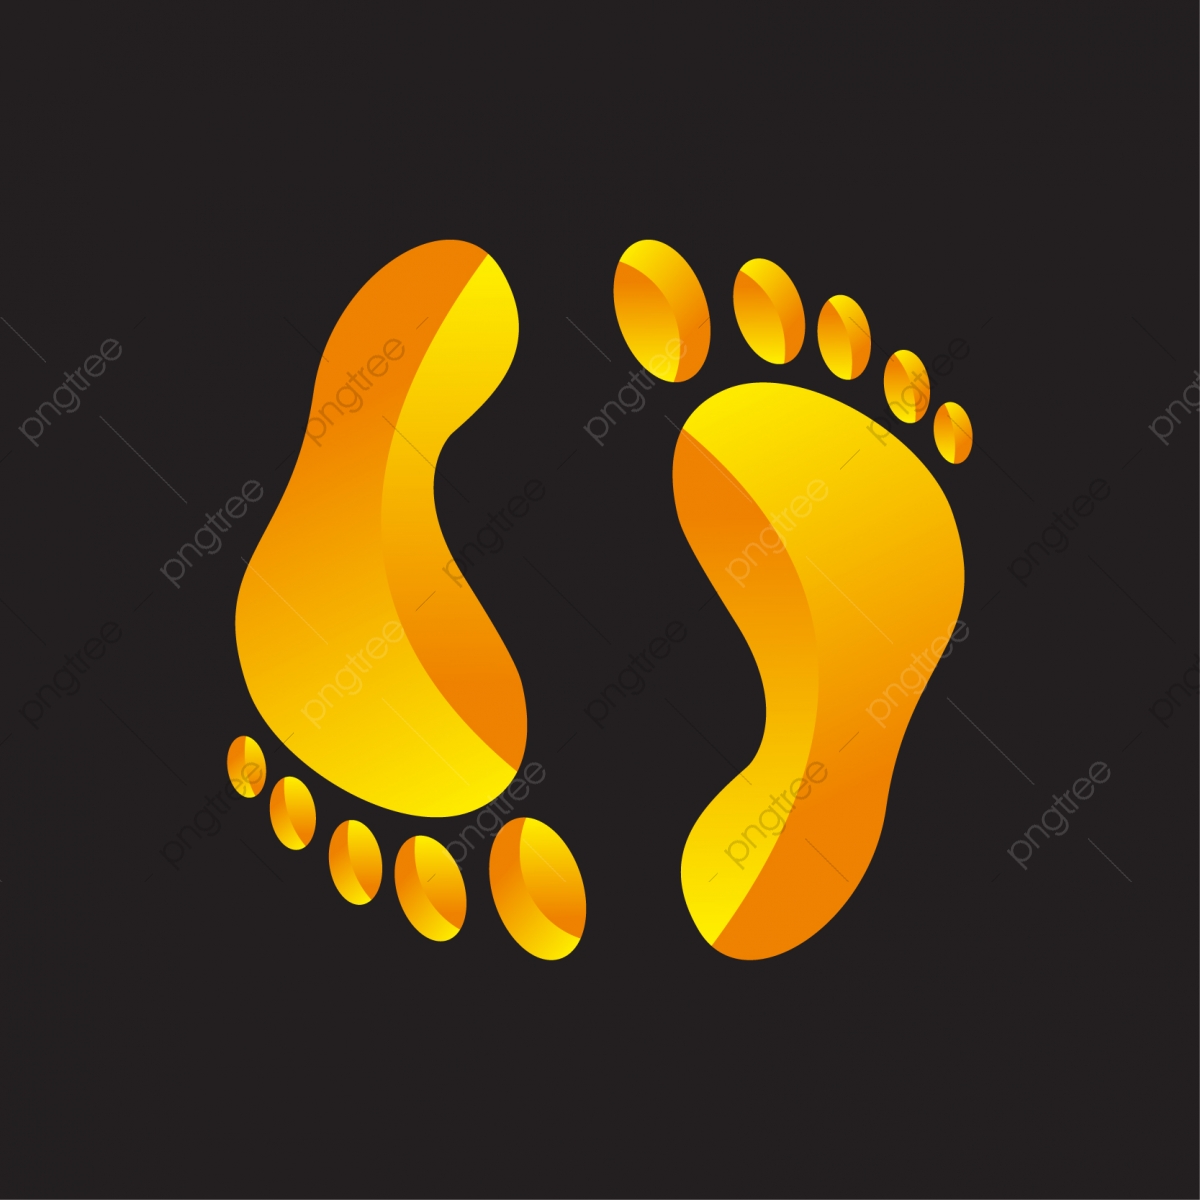 Footprint Vector Free Download at Vectorified.com | Collection of ...